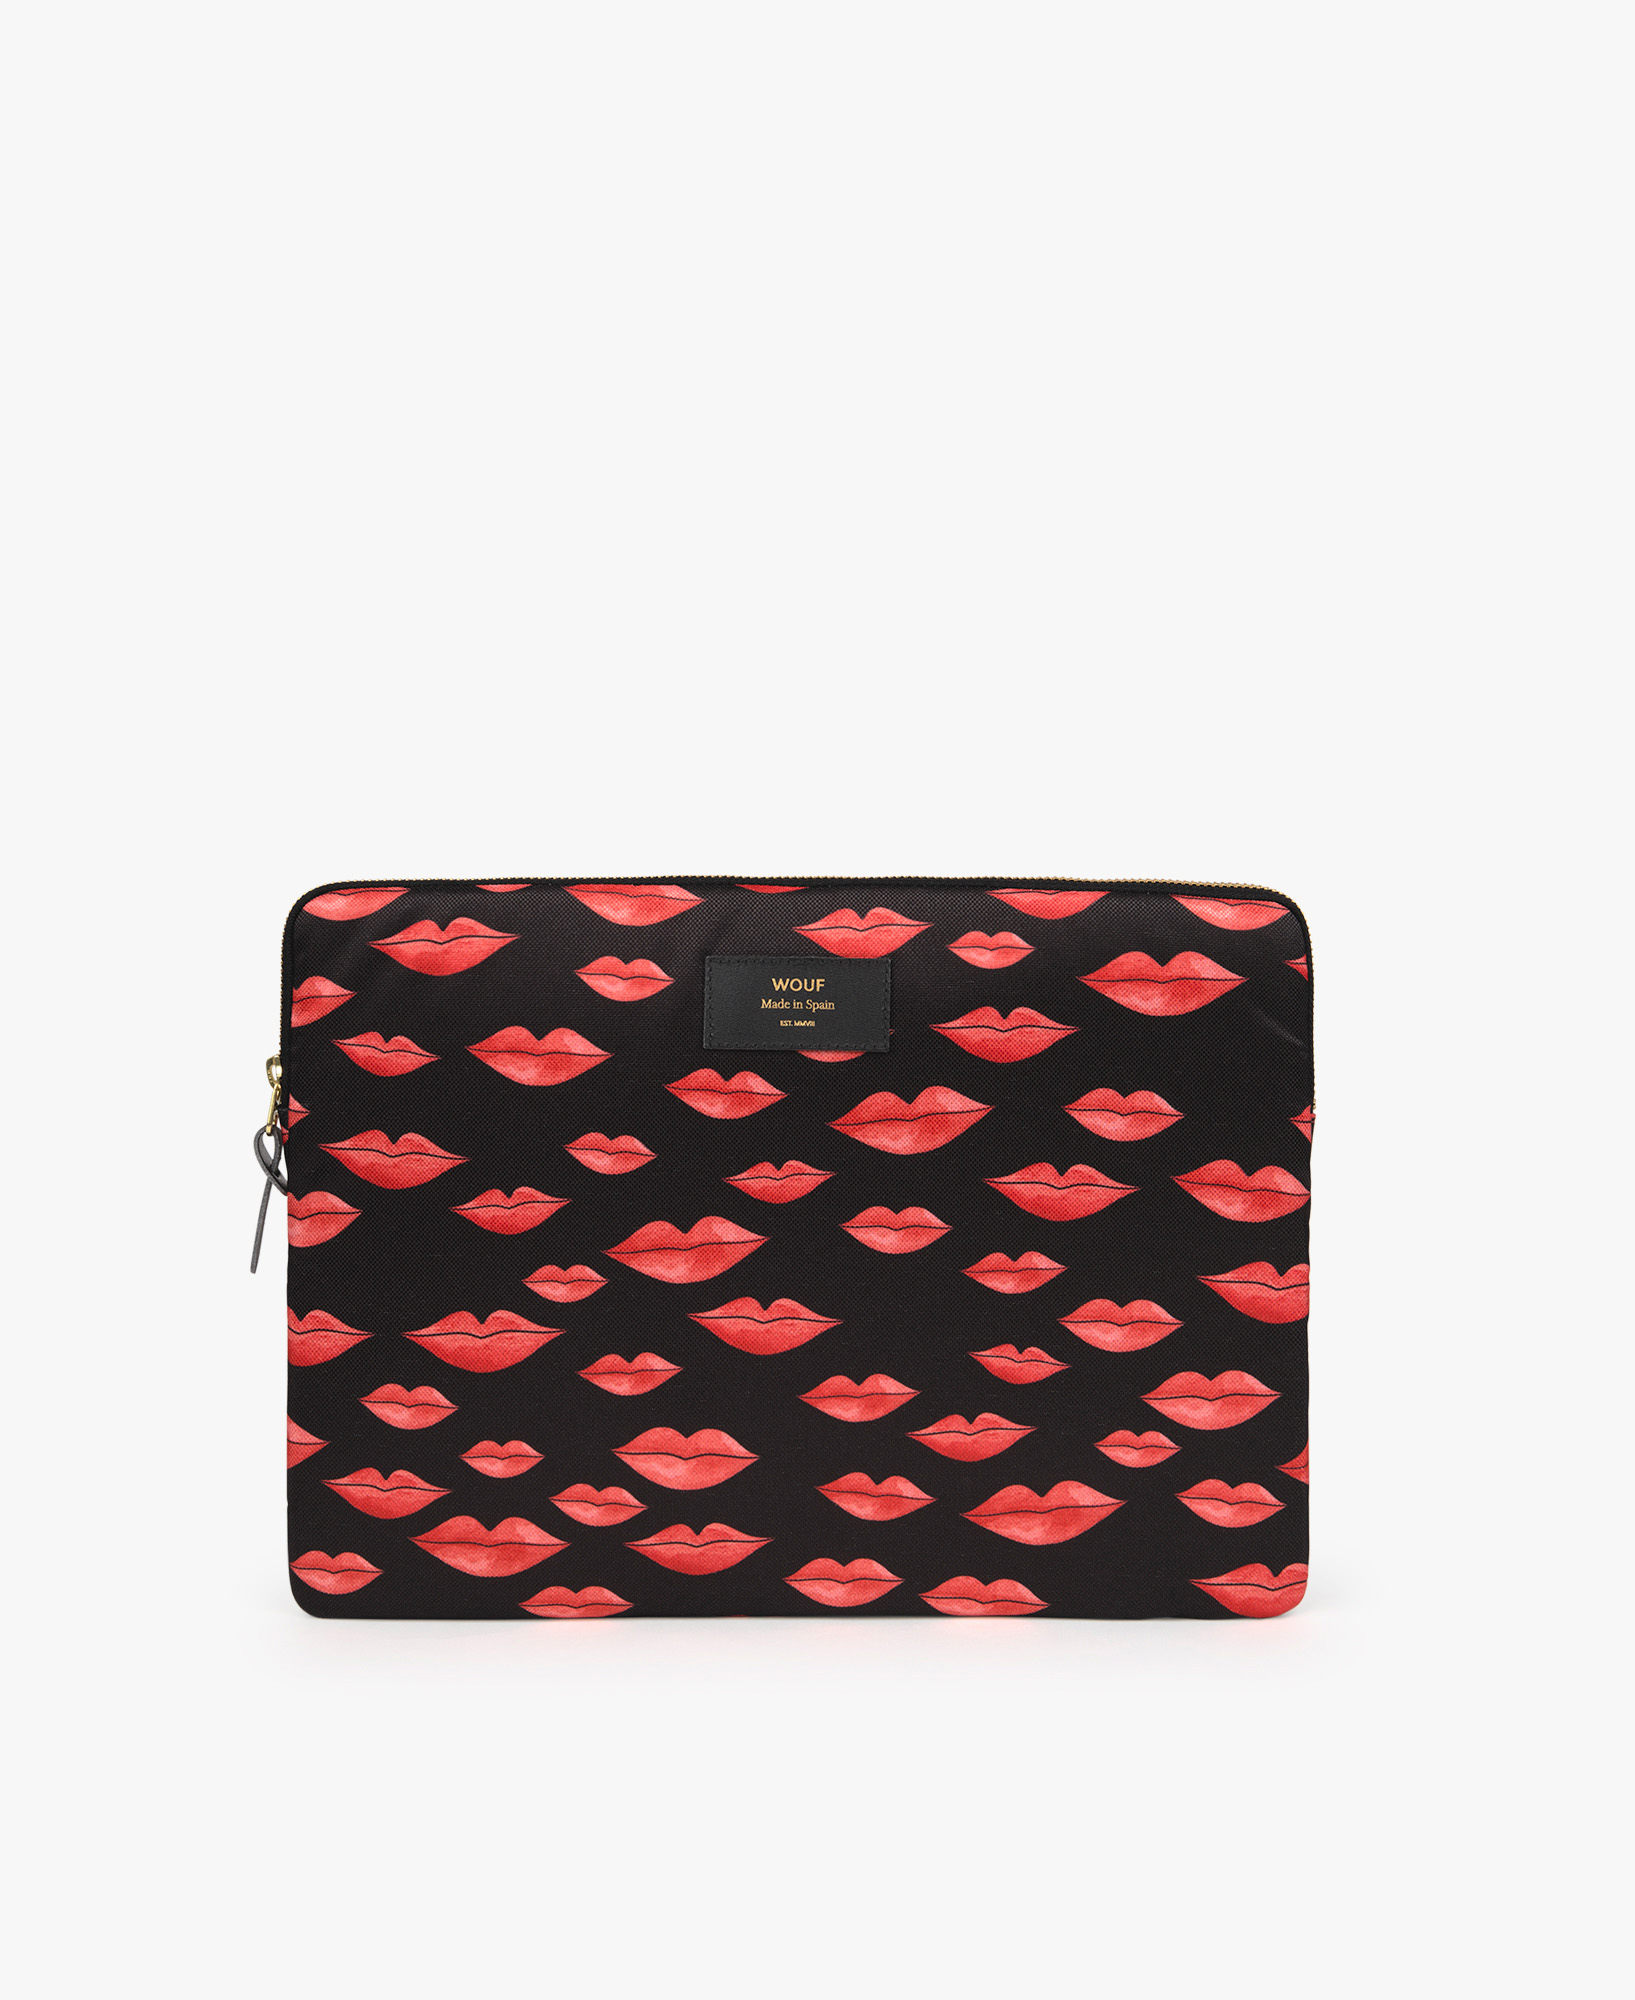 WOUF-13-Laptop-Sleeve-Beso-Front